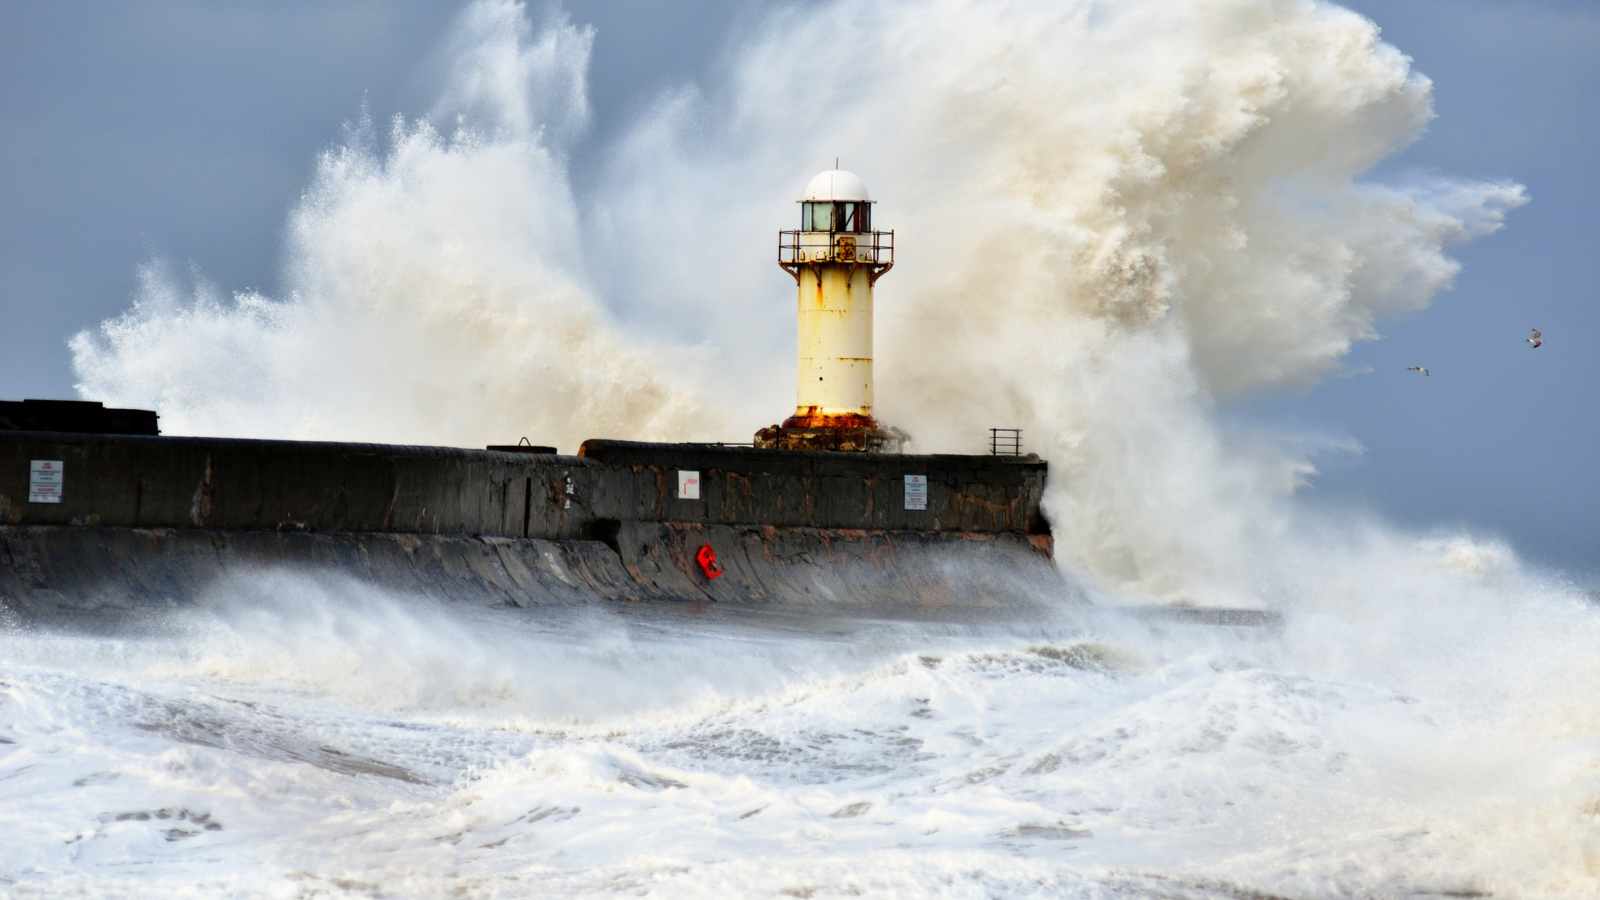 Crazy Storm And Old Lighthouse wallpaper 1600x900